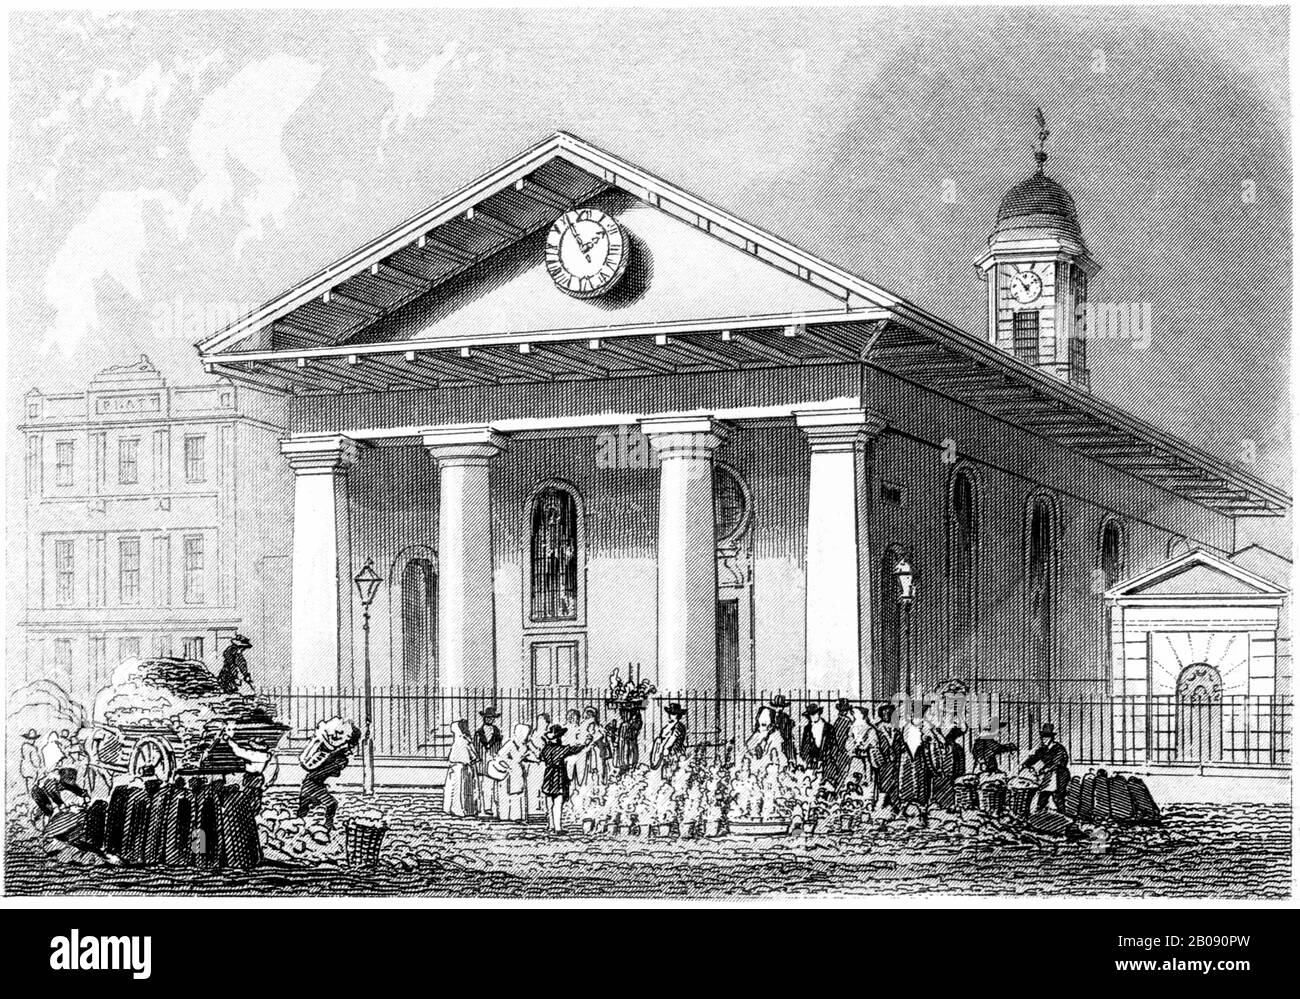 Engraving of St Pauls Covent Garden, London scanned at high resolution from a book printed in 1851. This image is believed to be free of all copyright Stock Photo